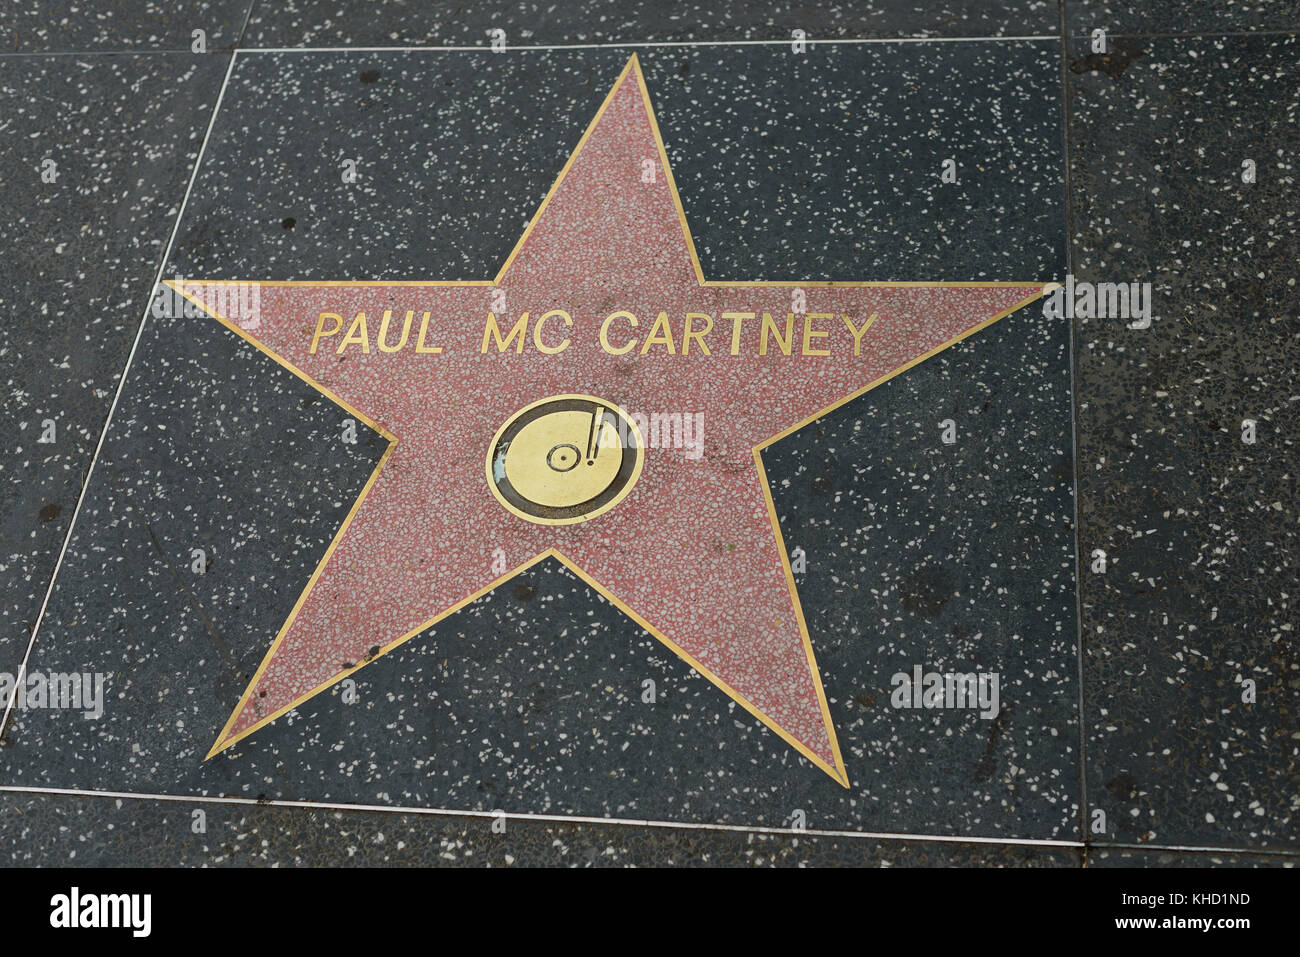 HOLLYWOOD, CA - DECEMBER 06: Paul McCartney star on the Hollywood Walk of Fame in Hollywood, California on Dec. 6, 2016. Stock Photo